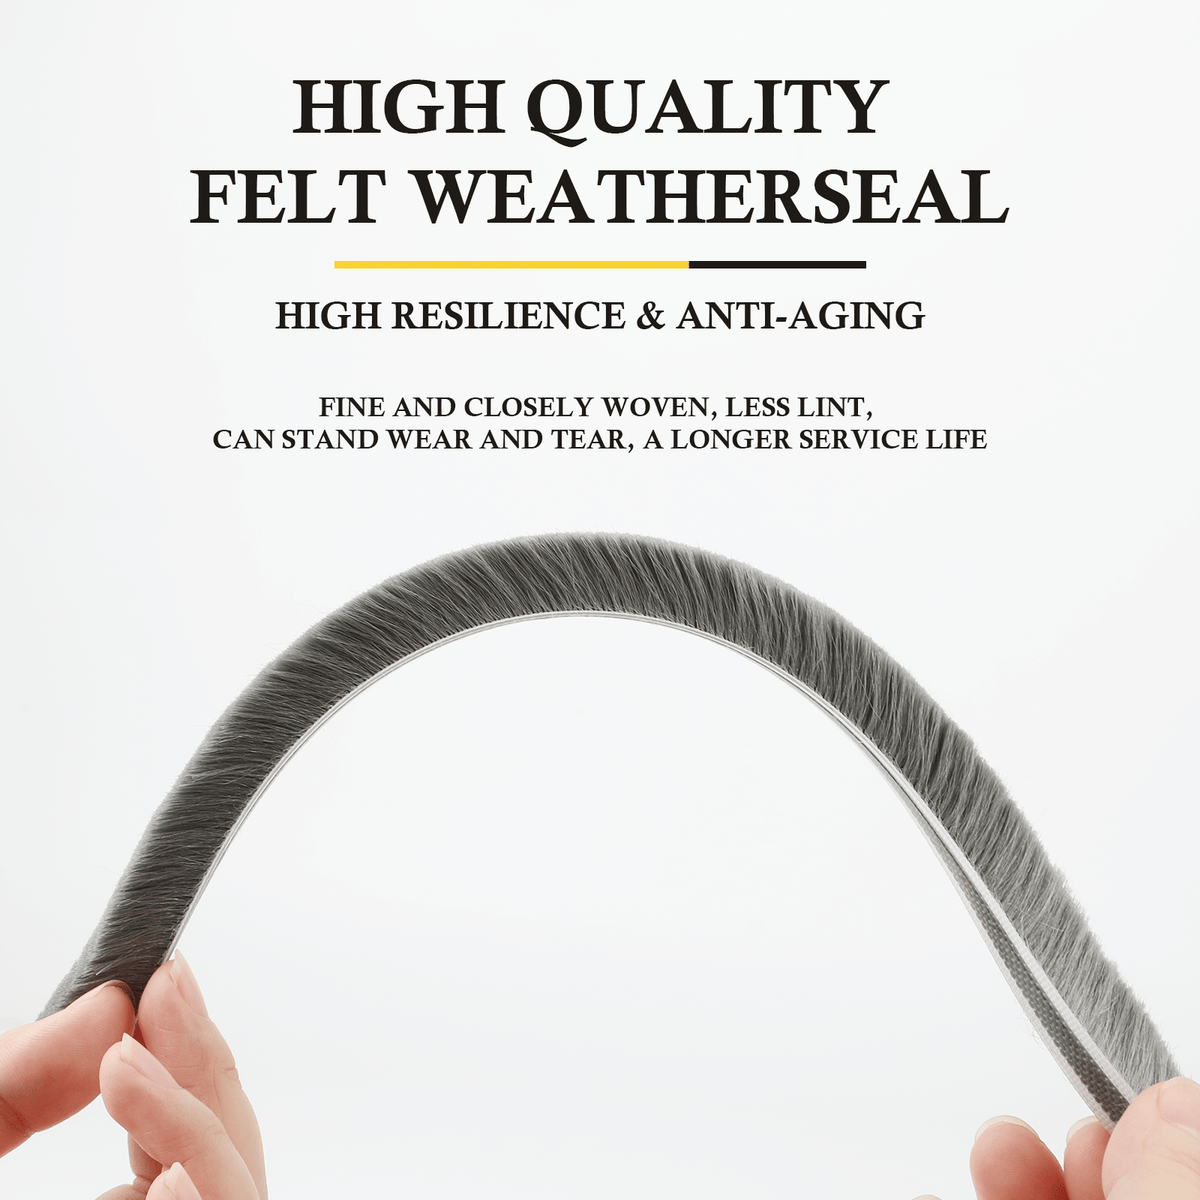 TORRAMI Felt Pile Weather Stripping Brush Strip for Window and Door Seal  11/32 inch x 11/32 inch x 16 ft,Strong Adhesive Backing Door Felt Strip for